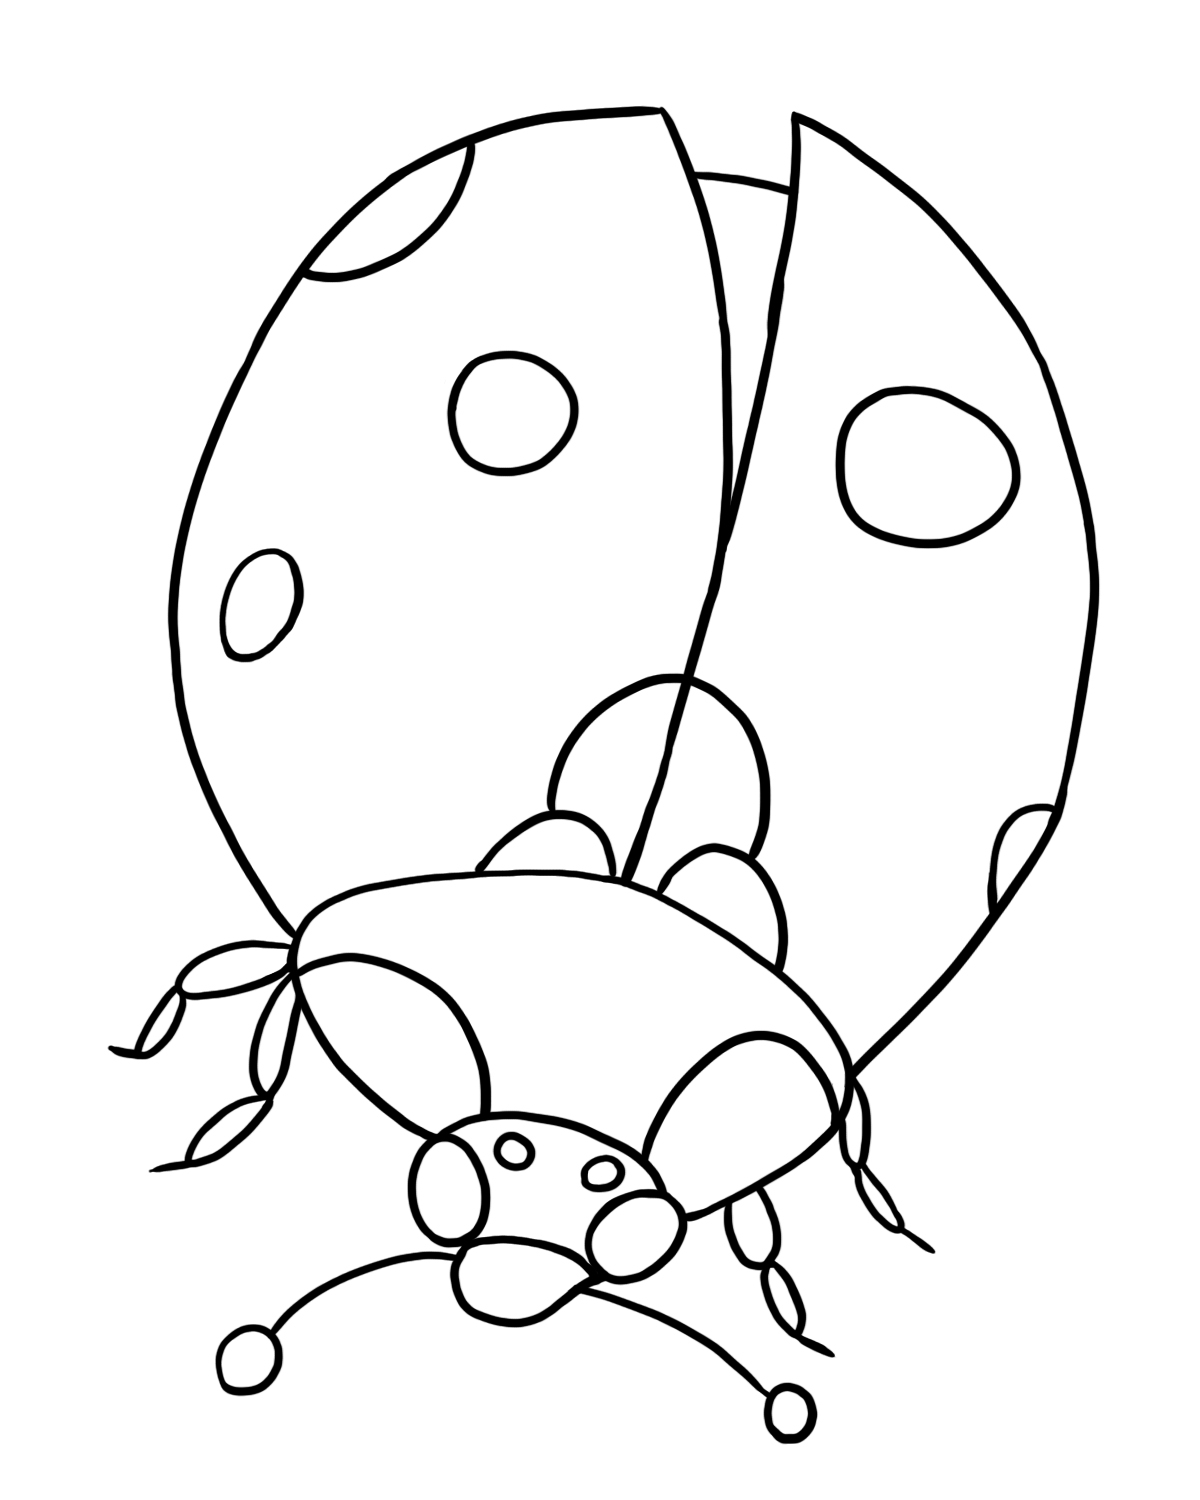 free-ladybug-coloring-pages-to-print-out-and-color